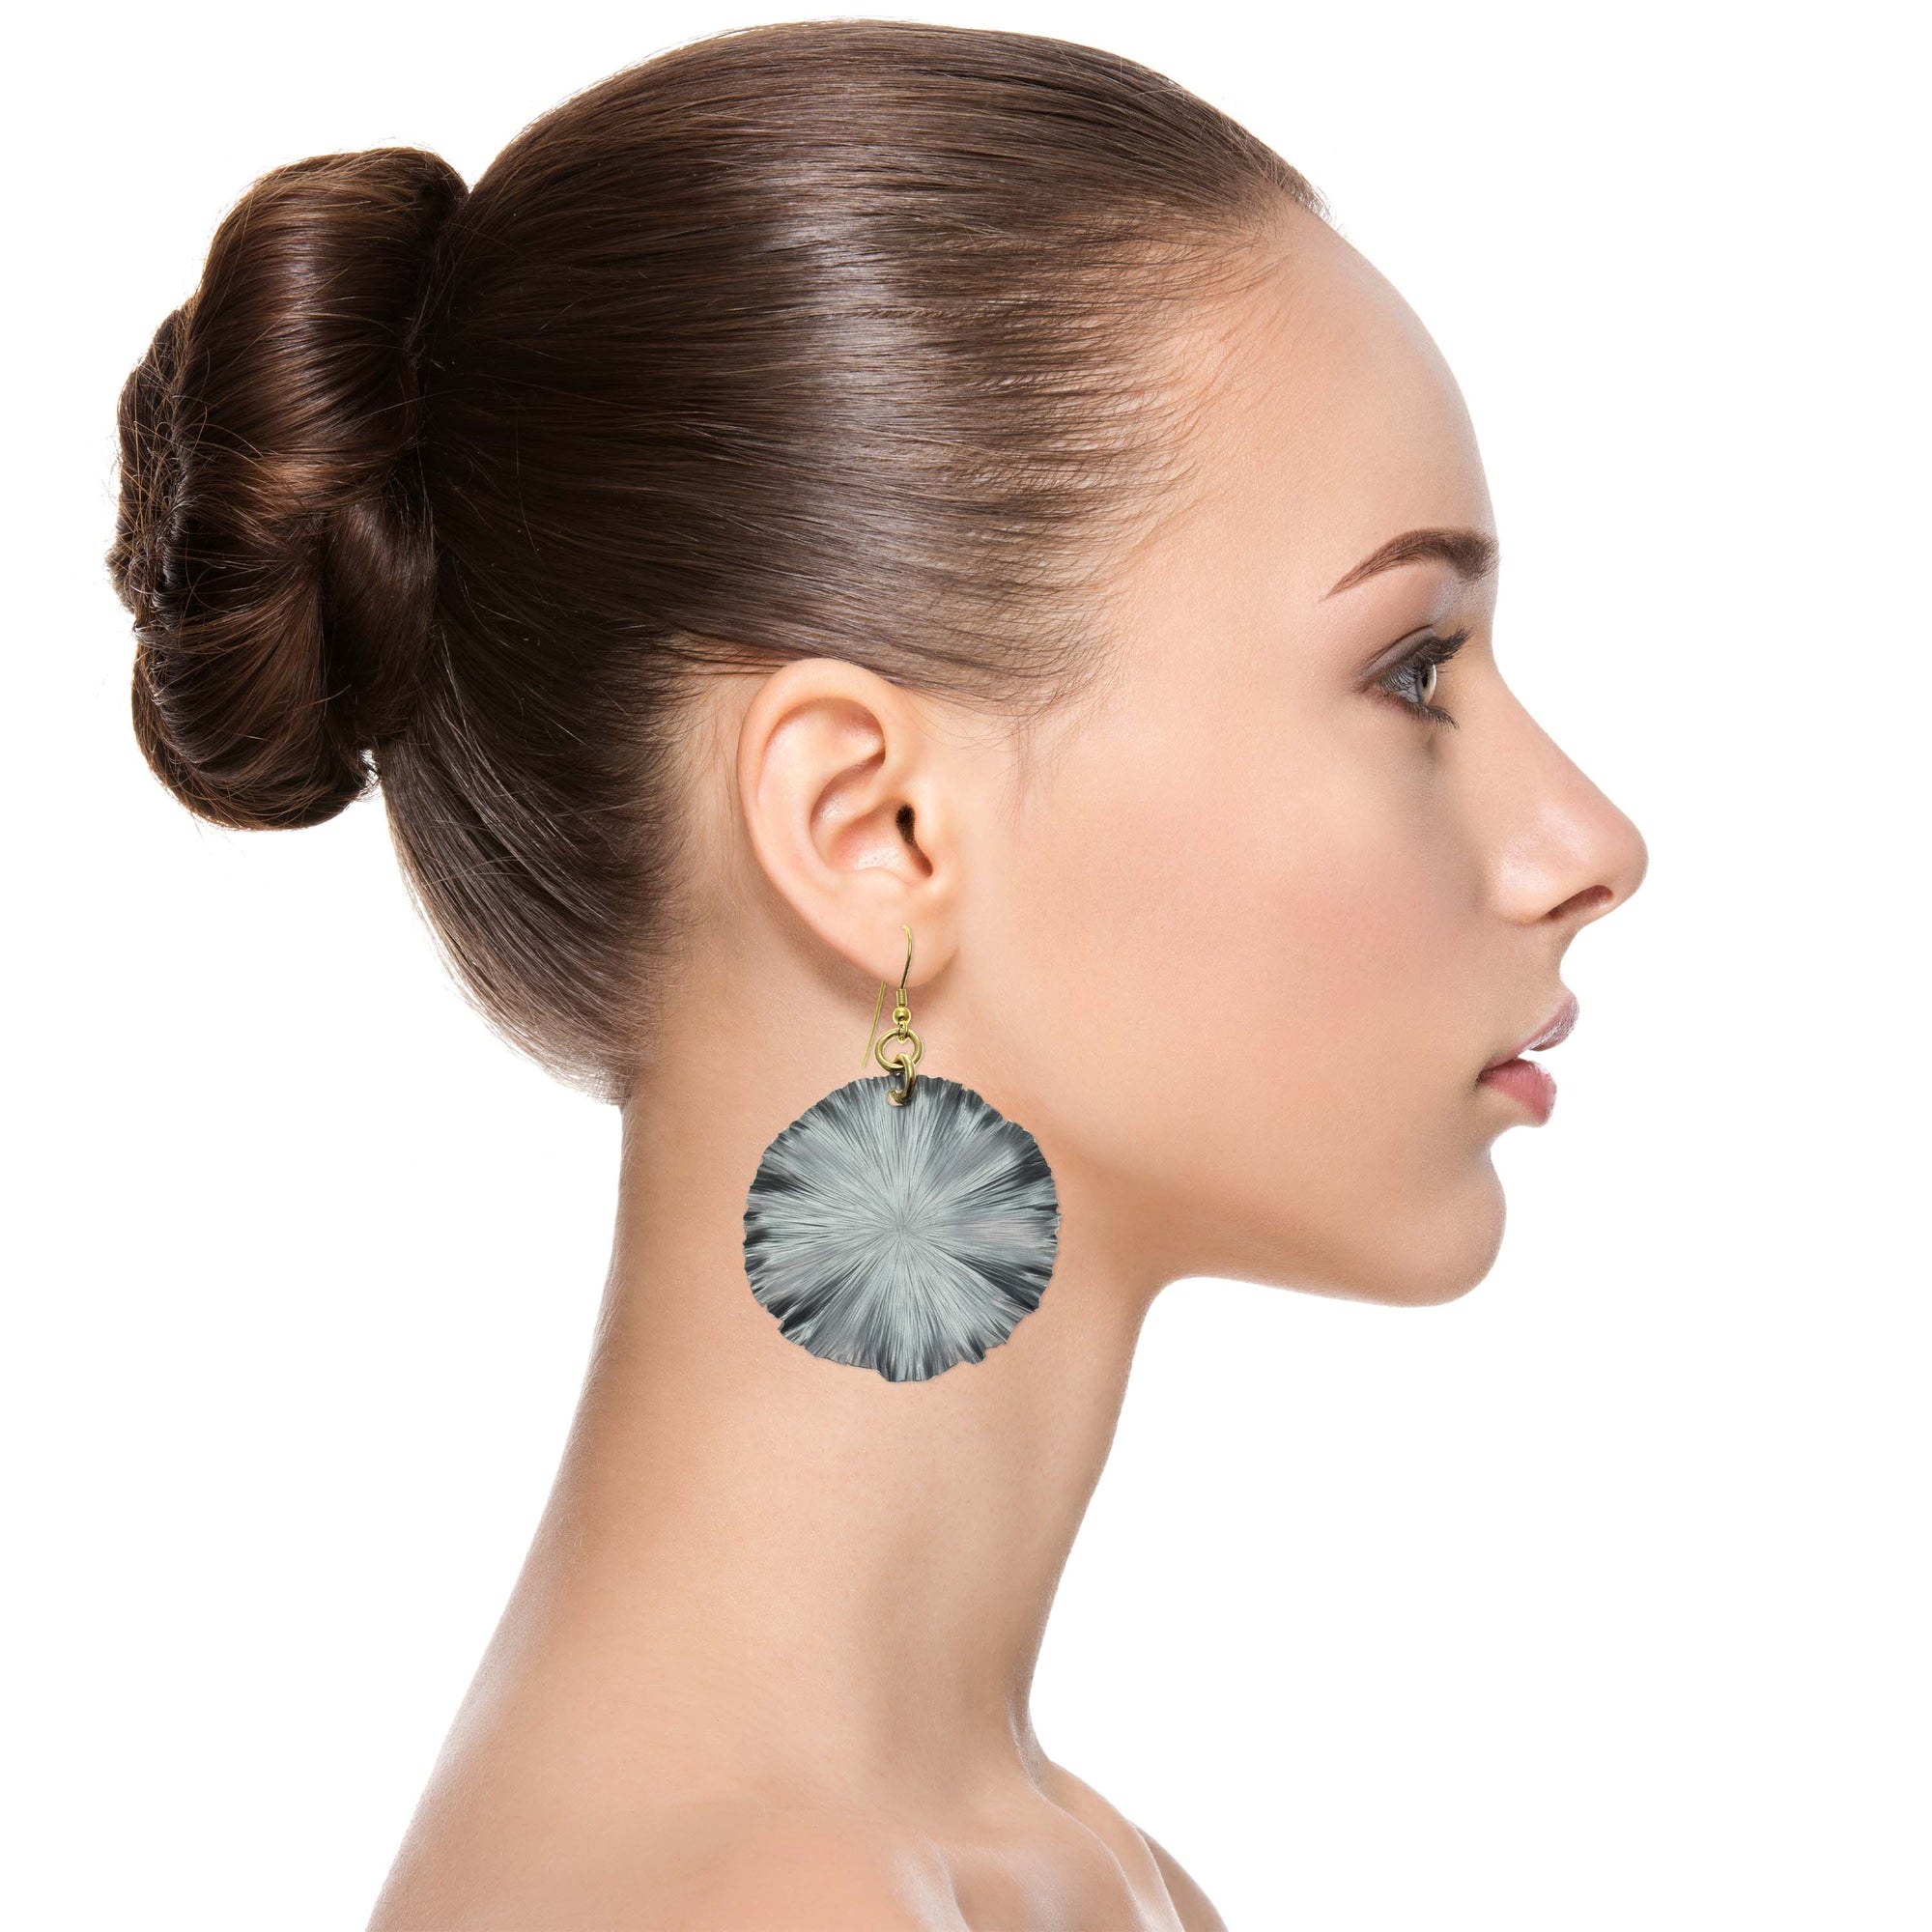 Stylish Women Wearing Large Lily Pad Anodized Aluminum Pewter Gray Leaf Earrings